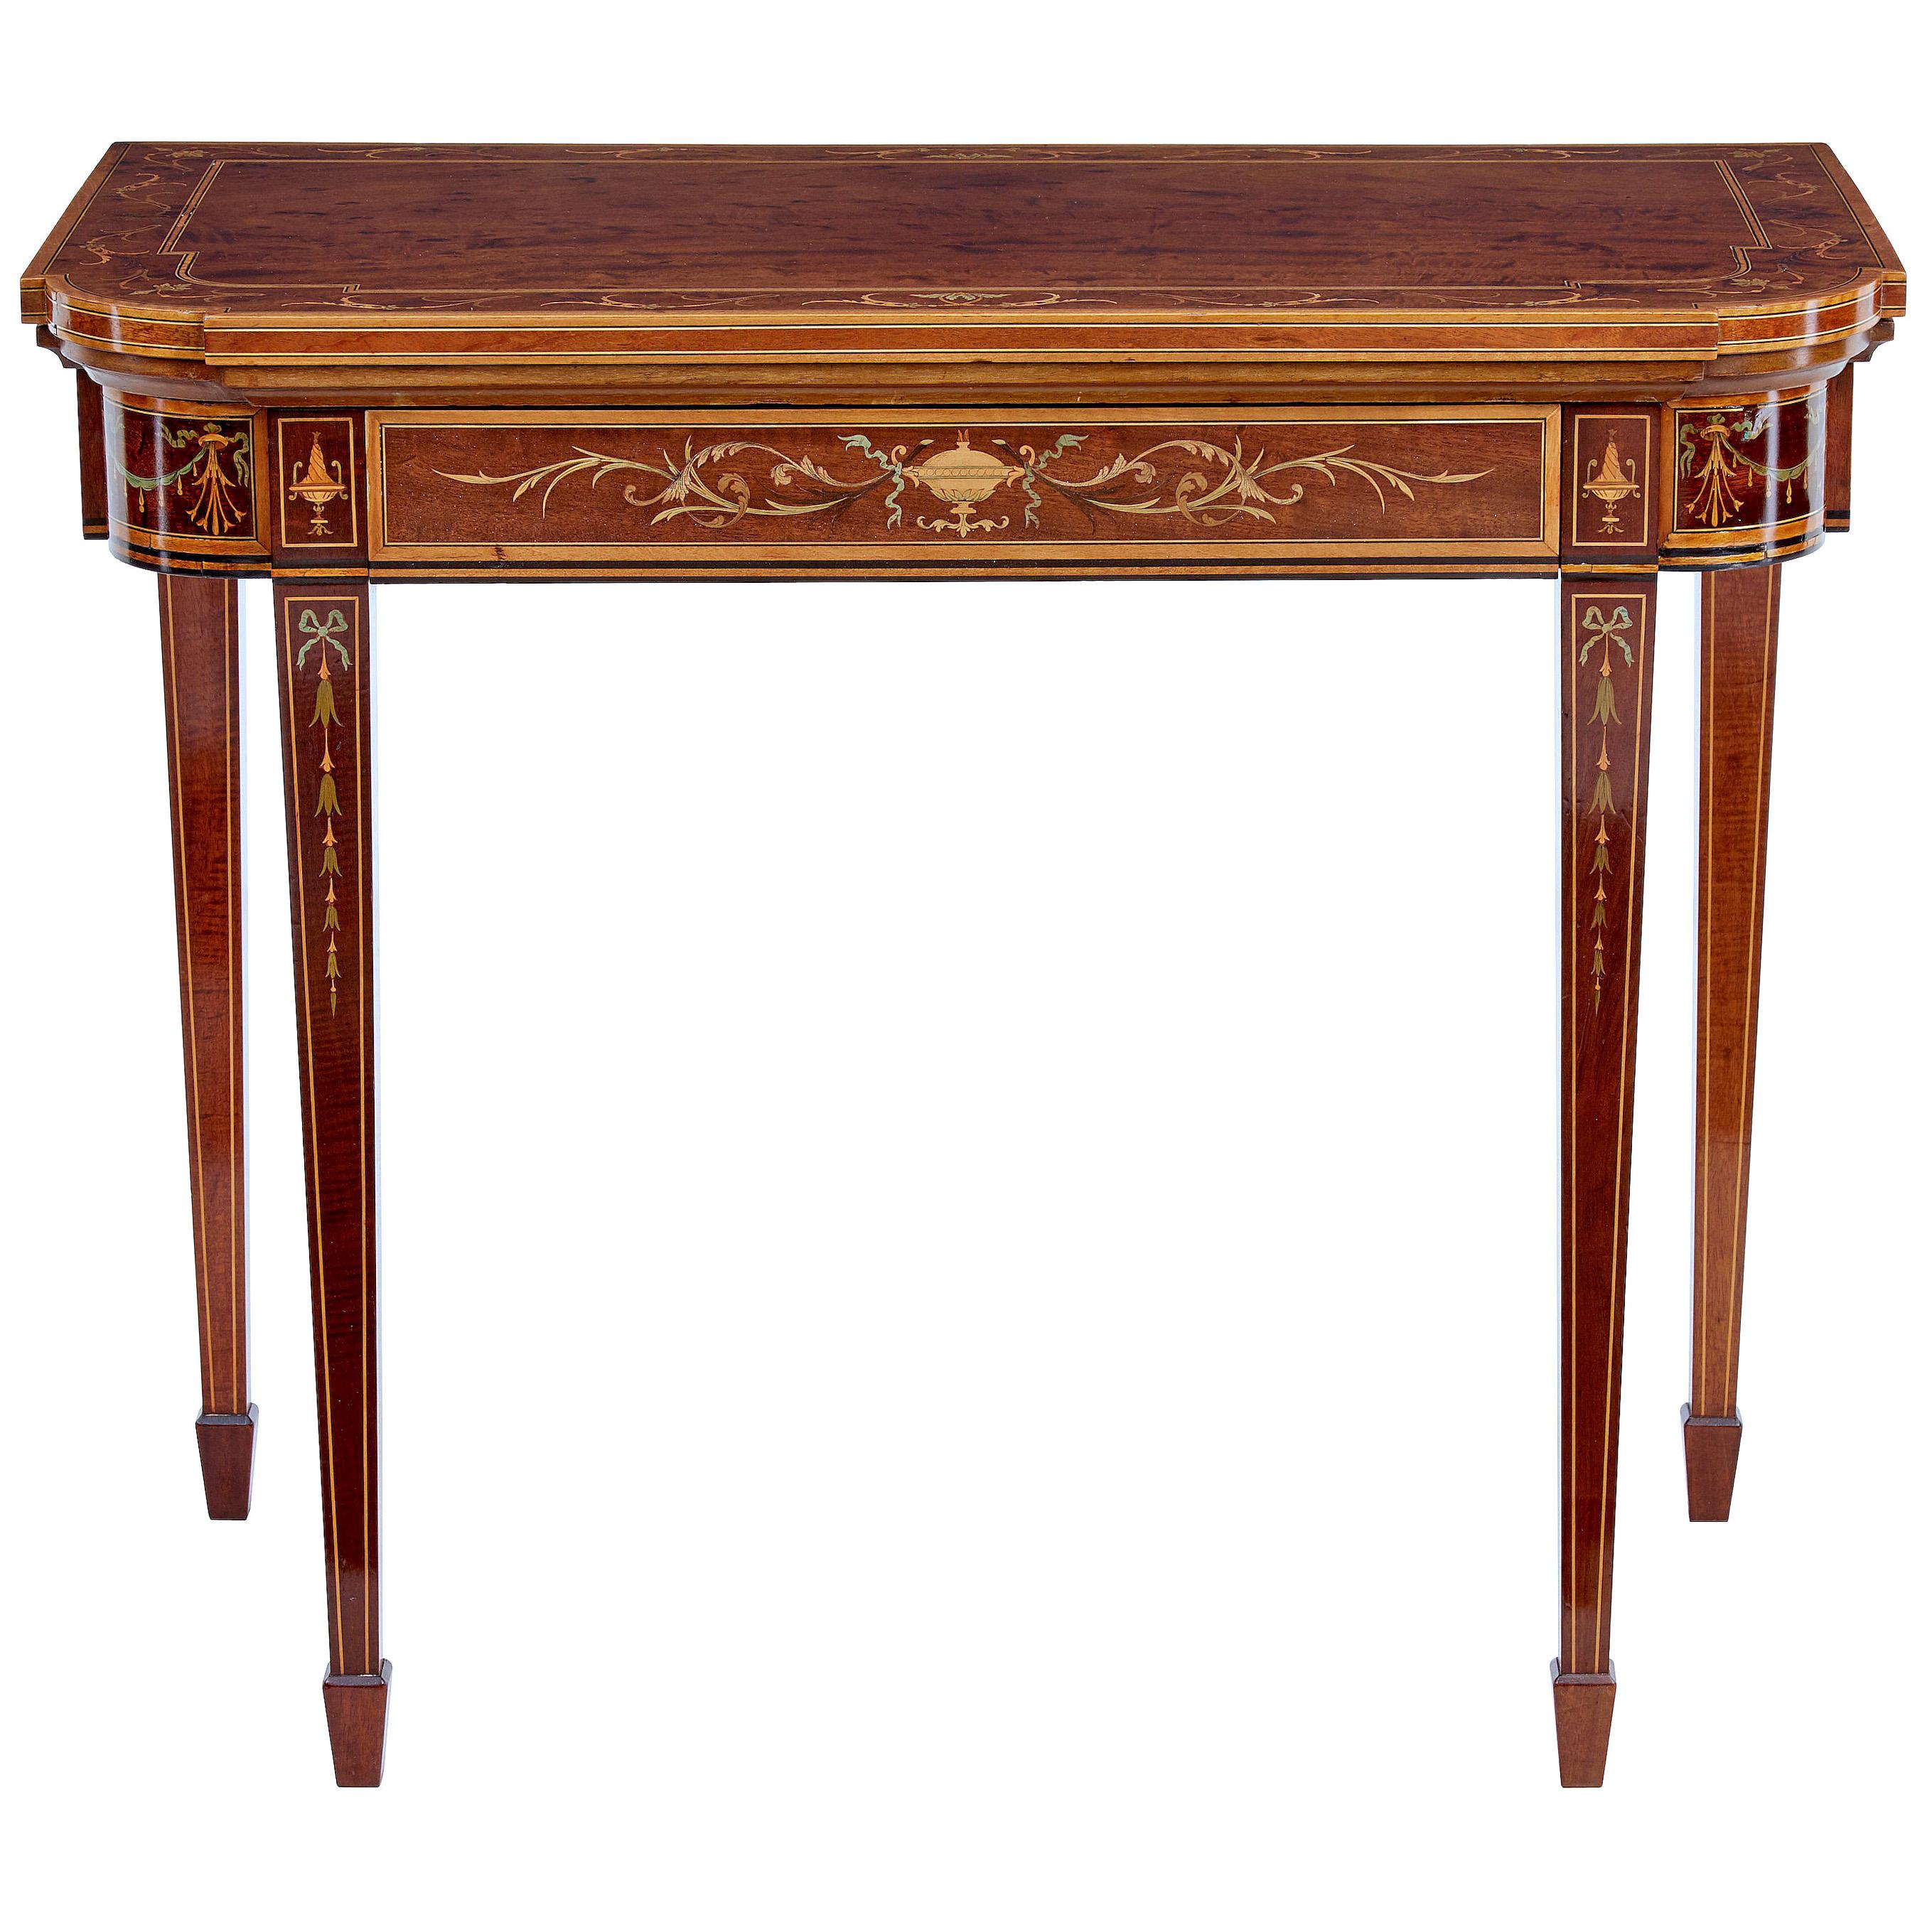 Late 19th Century Inlaid Mahogany Card Table by Edwards and Roberts